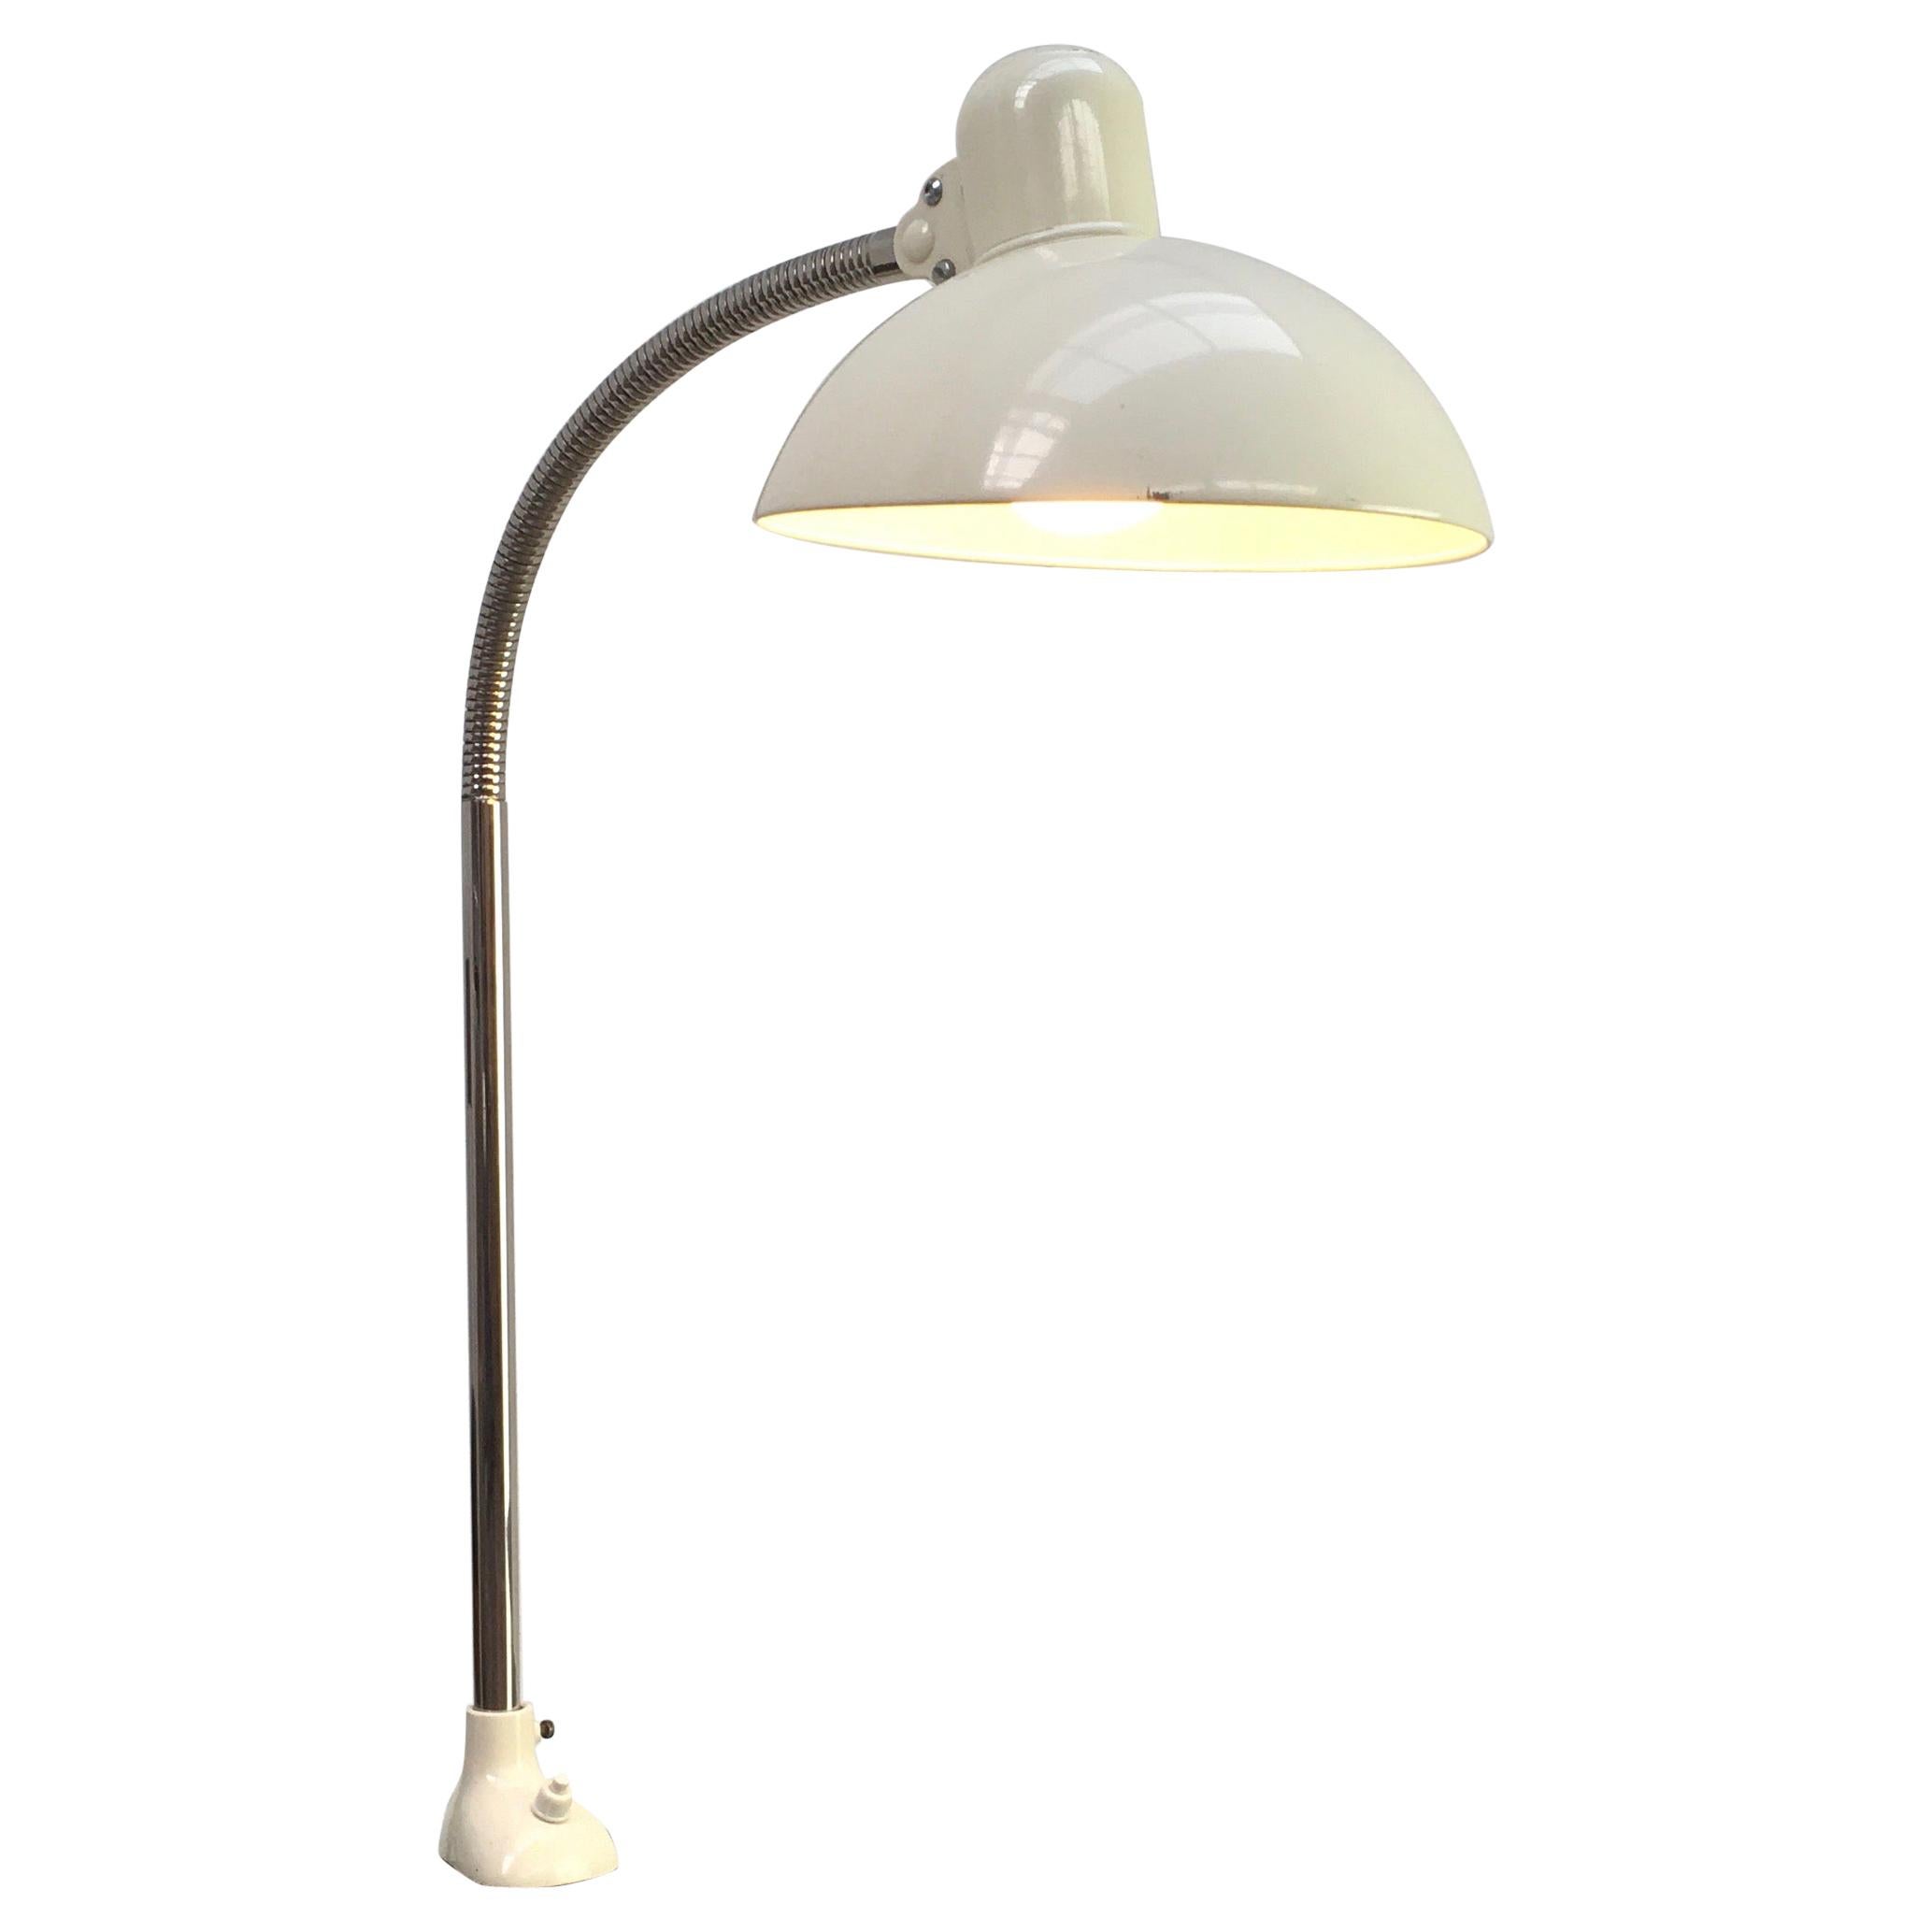 Christian Dell Kaiser Idell 6740 Task Lamp with Clamp, Germany, 1930s